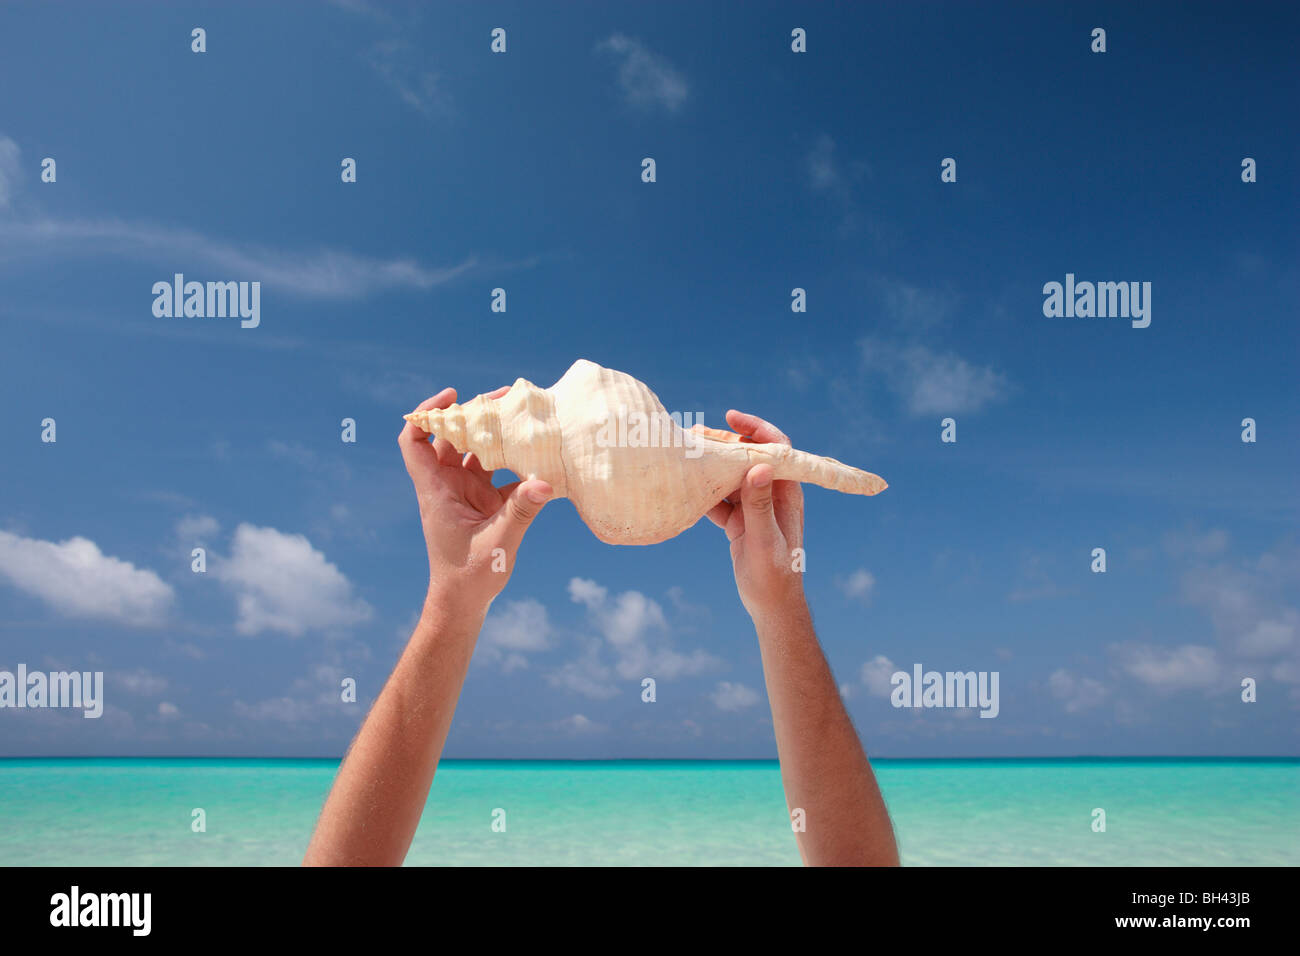 Man's hands holding a large sea shell in the air on a deserted tropical beach Stock Photo